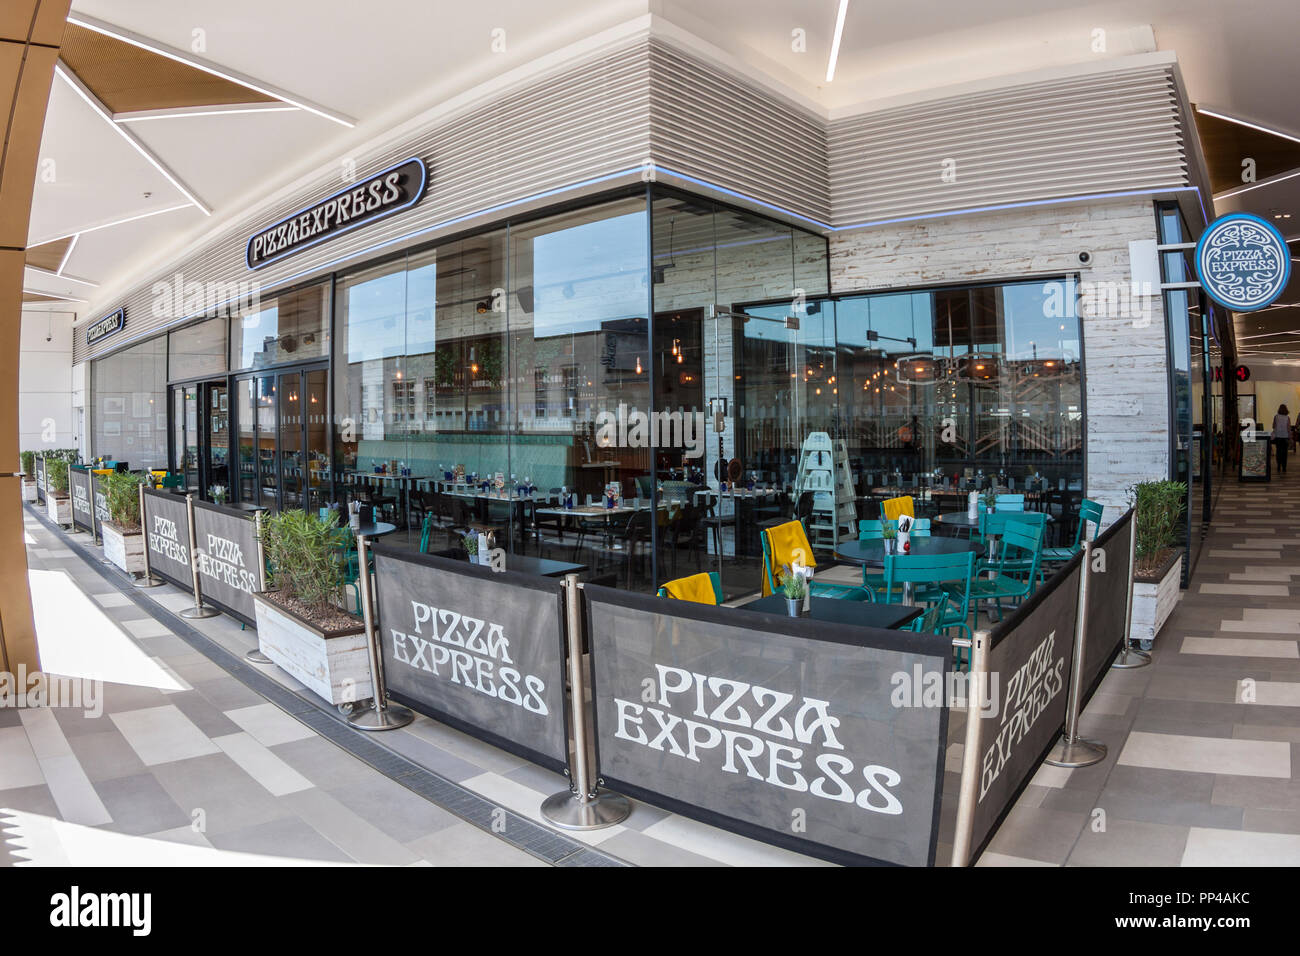 Pizza Express, restaurant and terrace, The Moor, Sheffield Stock Photo